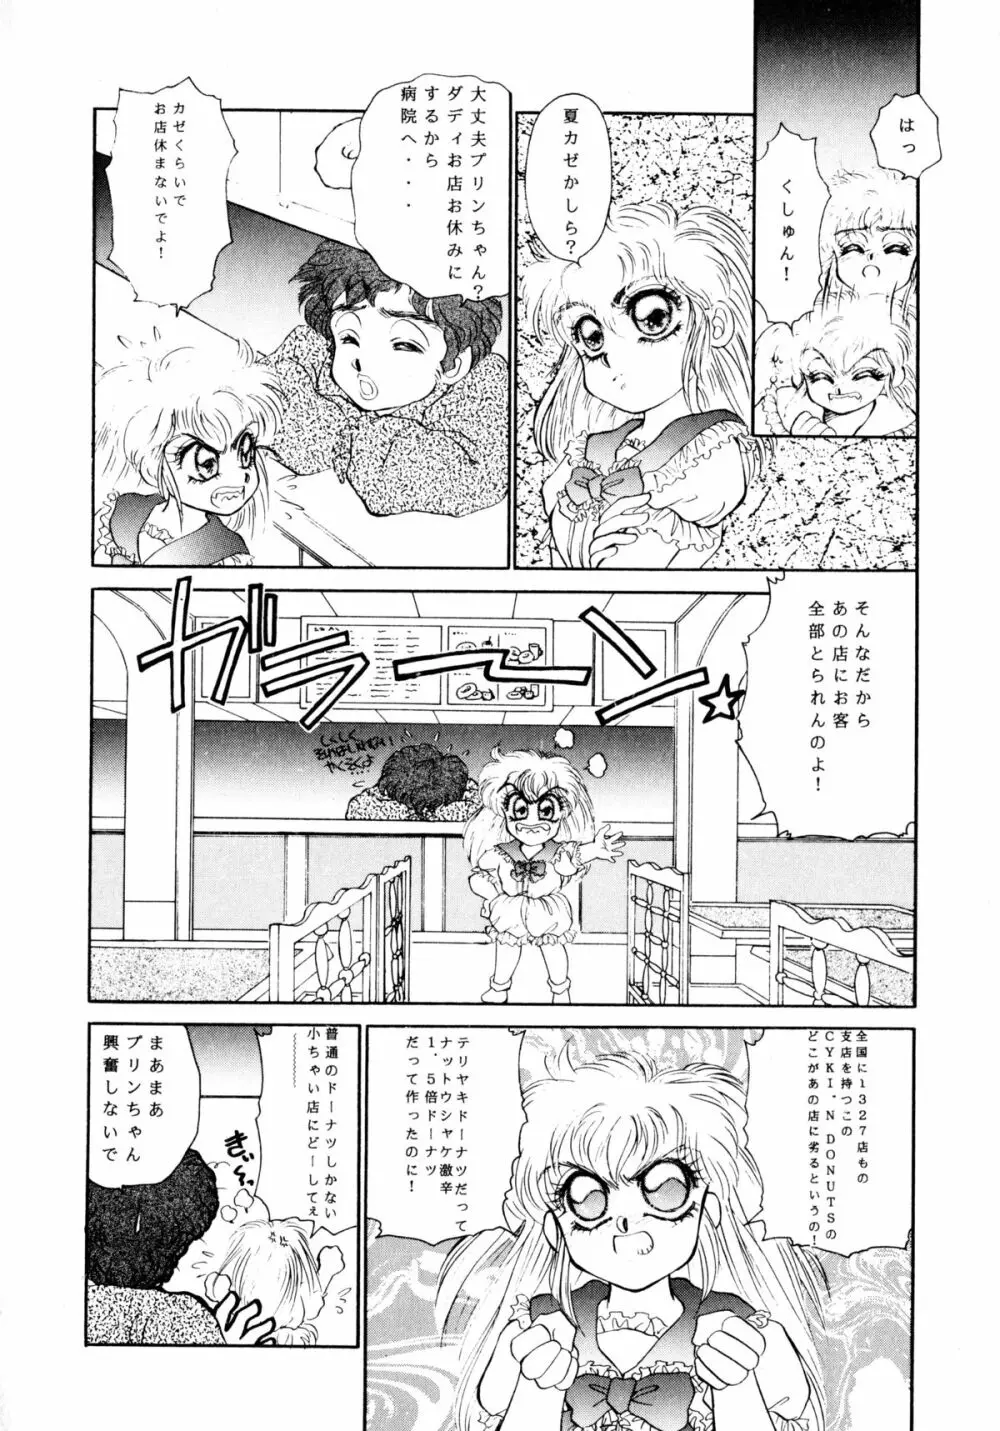 After Page.81